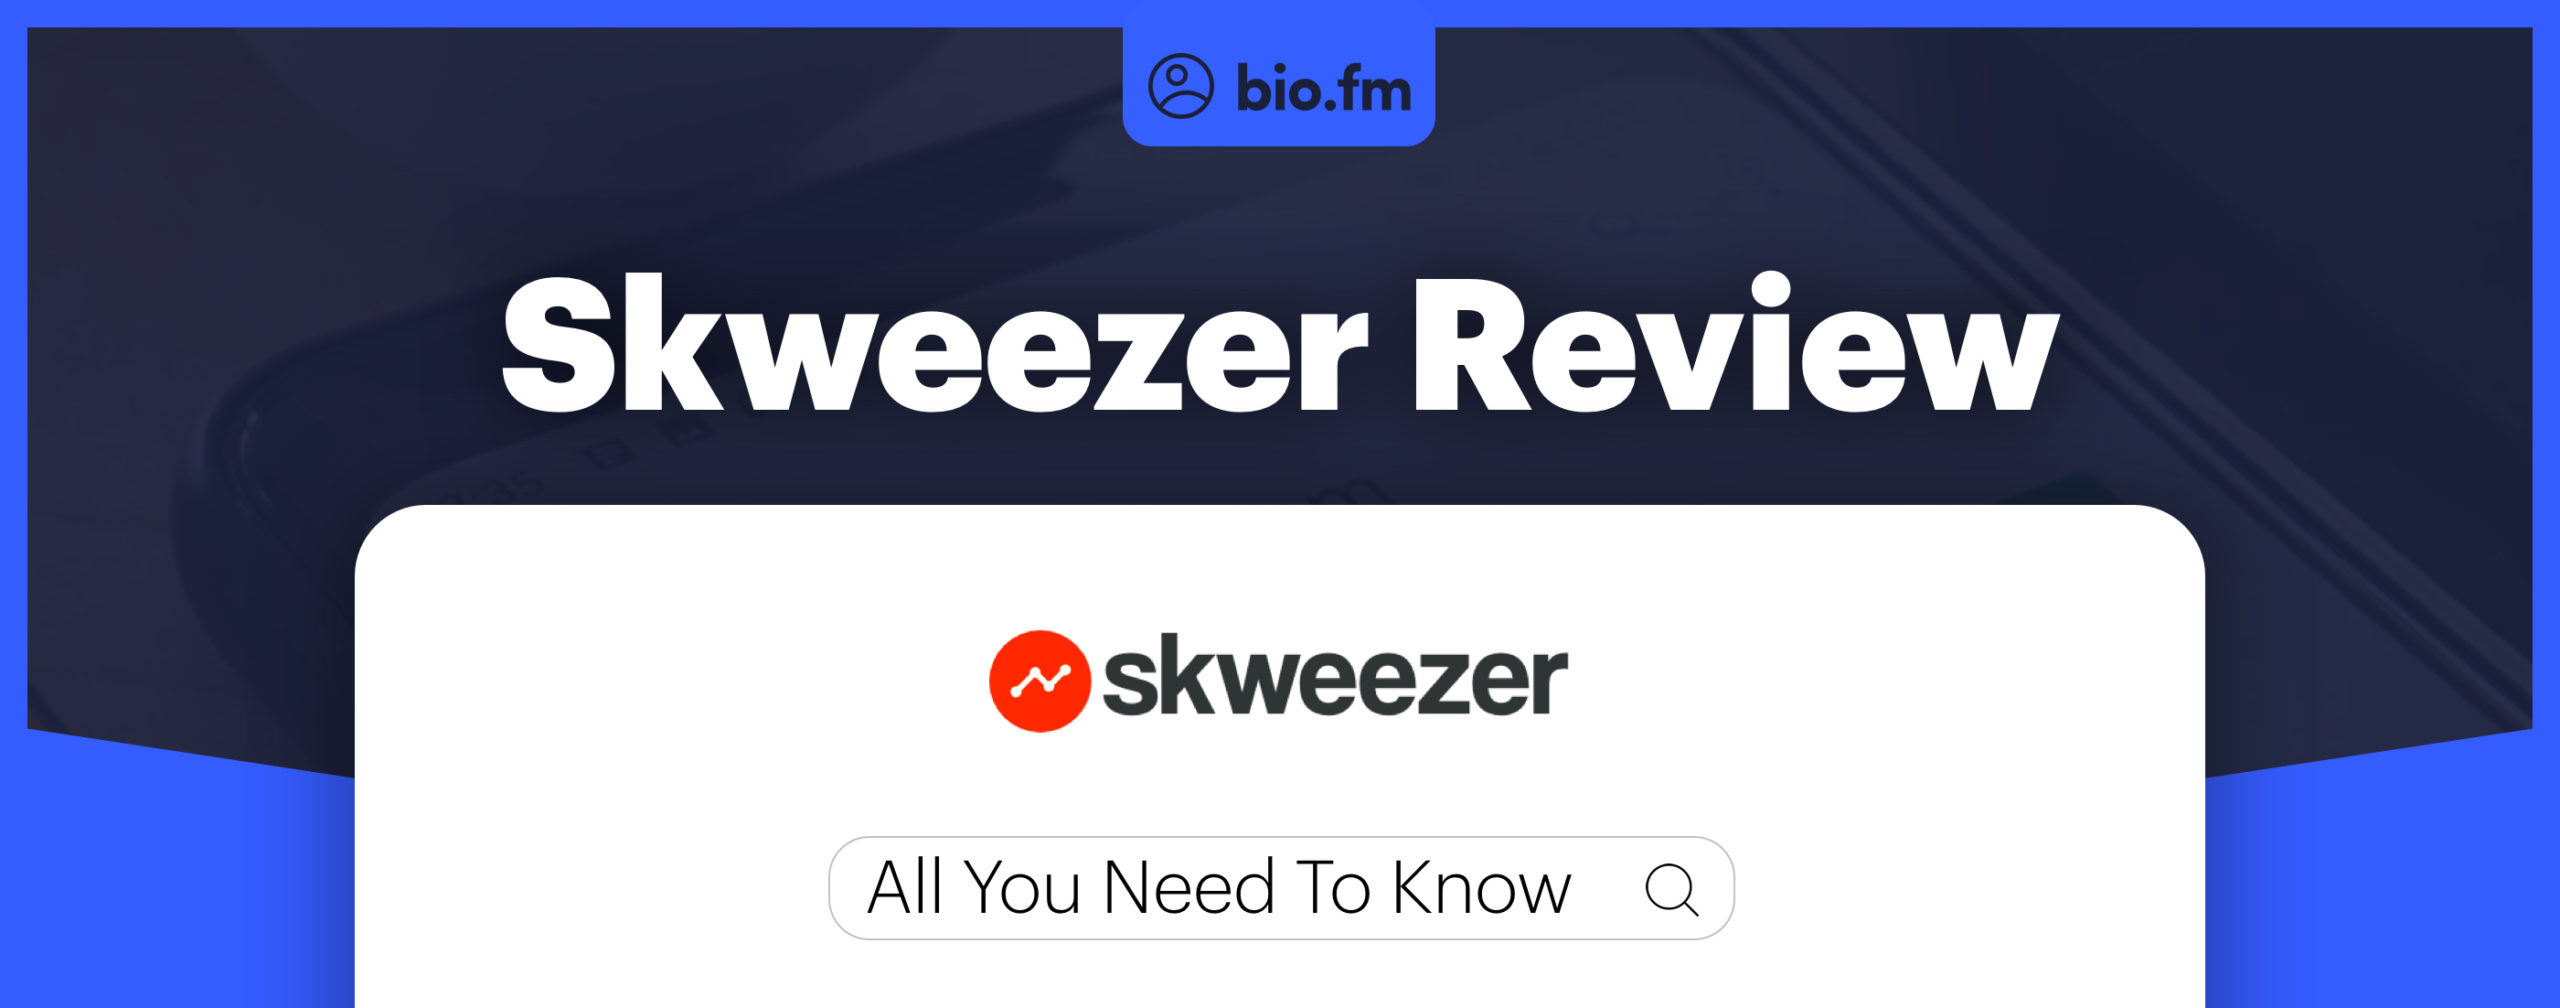 skweezer review featured image